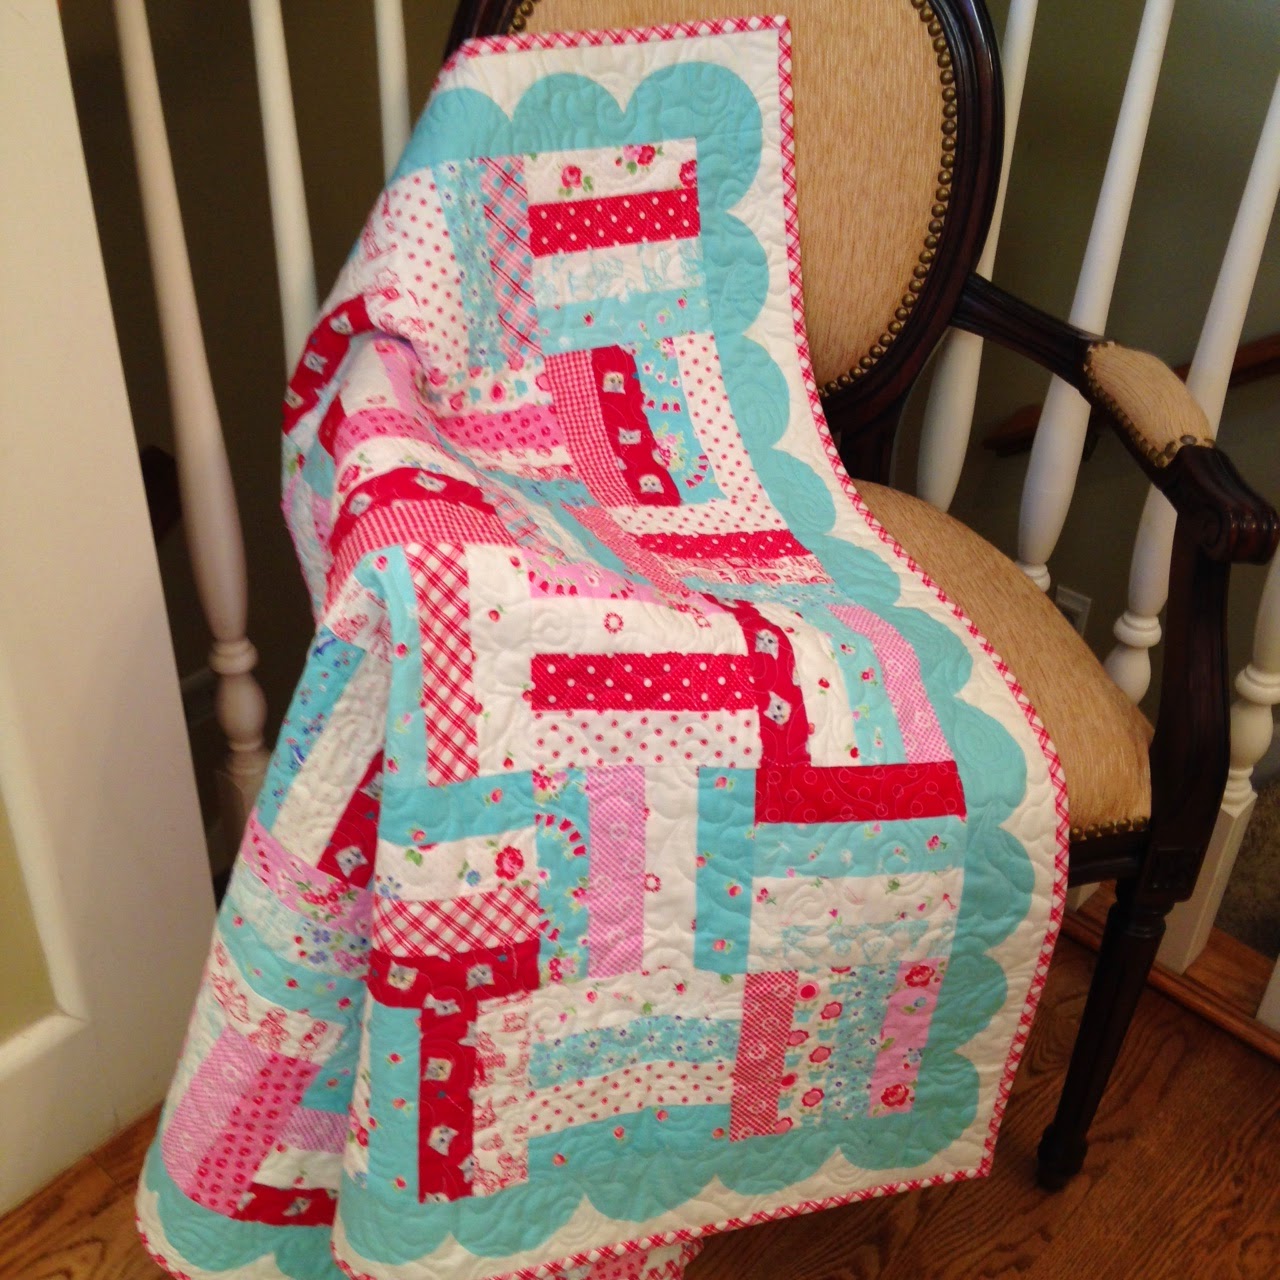 Baby Quilt for Claire Merrill McNeil - Freda's Hive